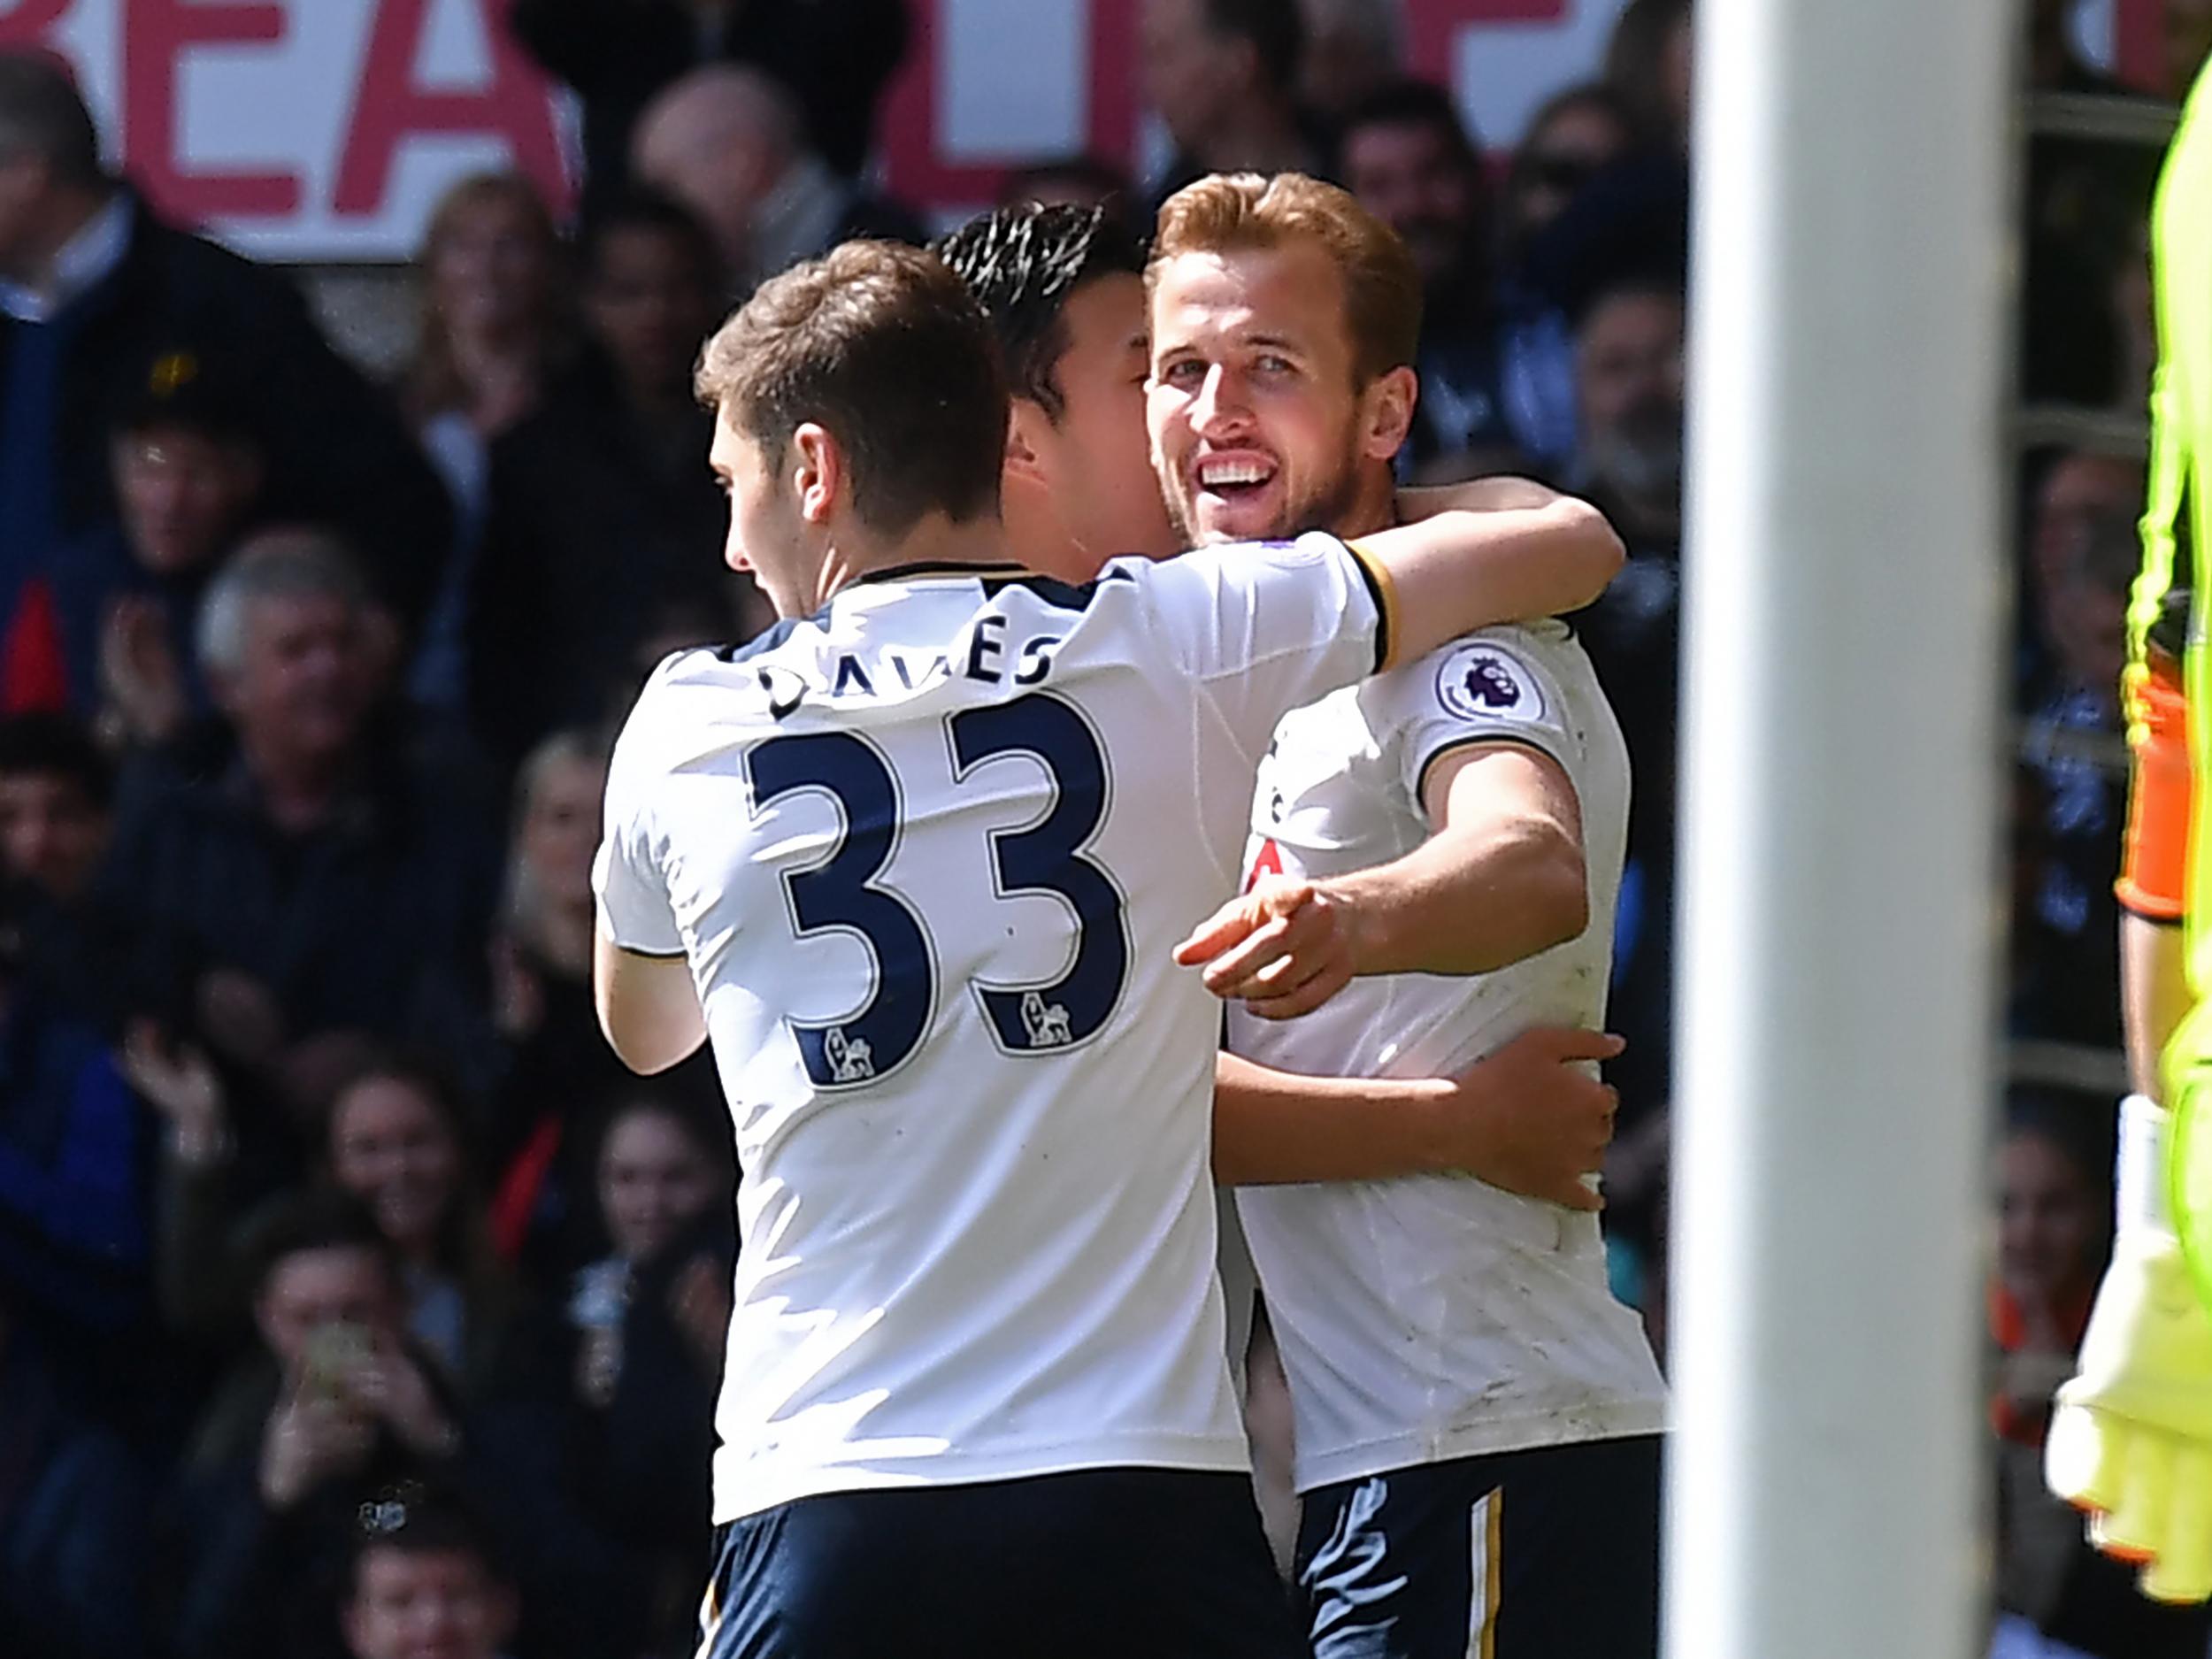 Kane is in a confident mood ahead of Saturday's Wembley semi-final